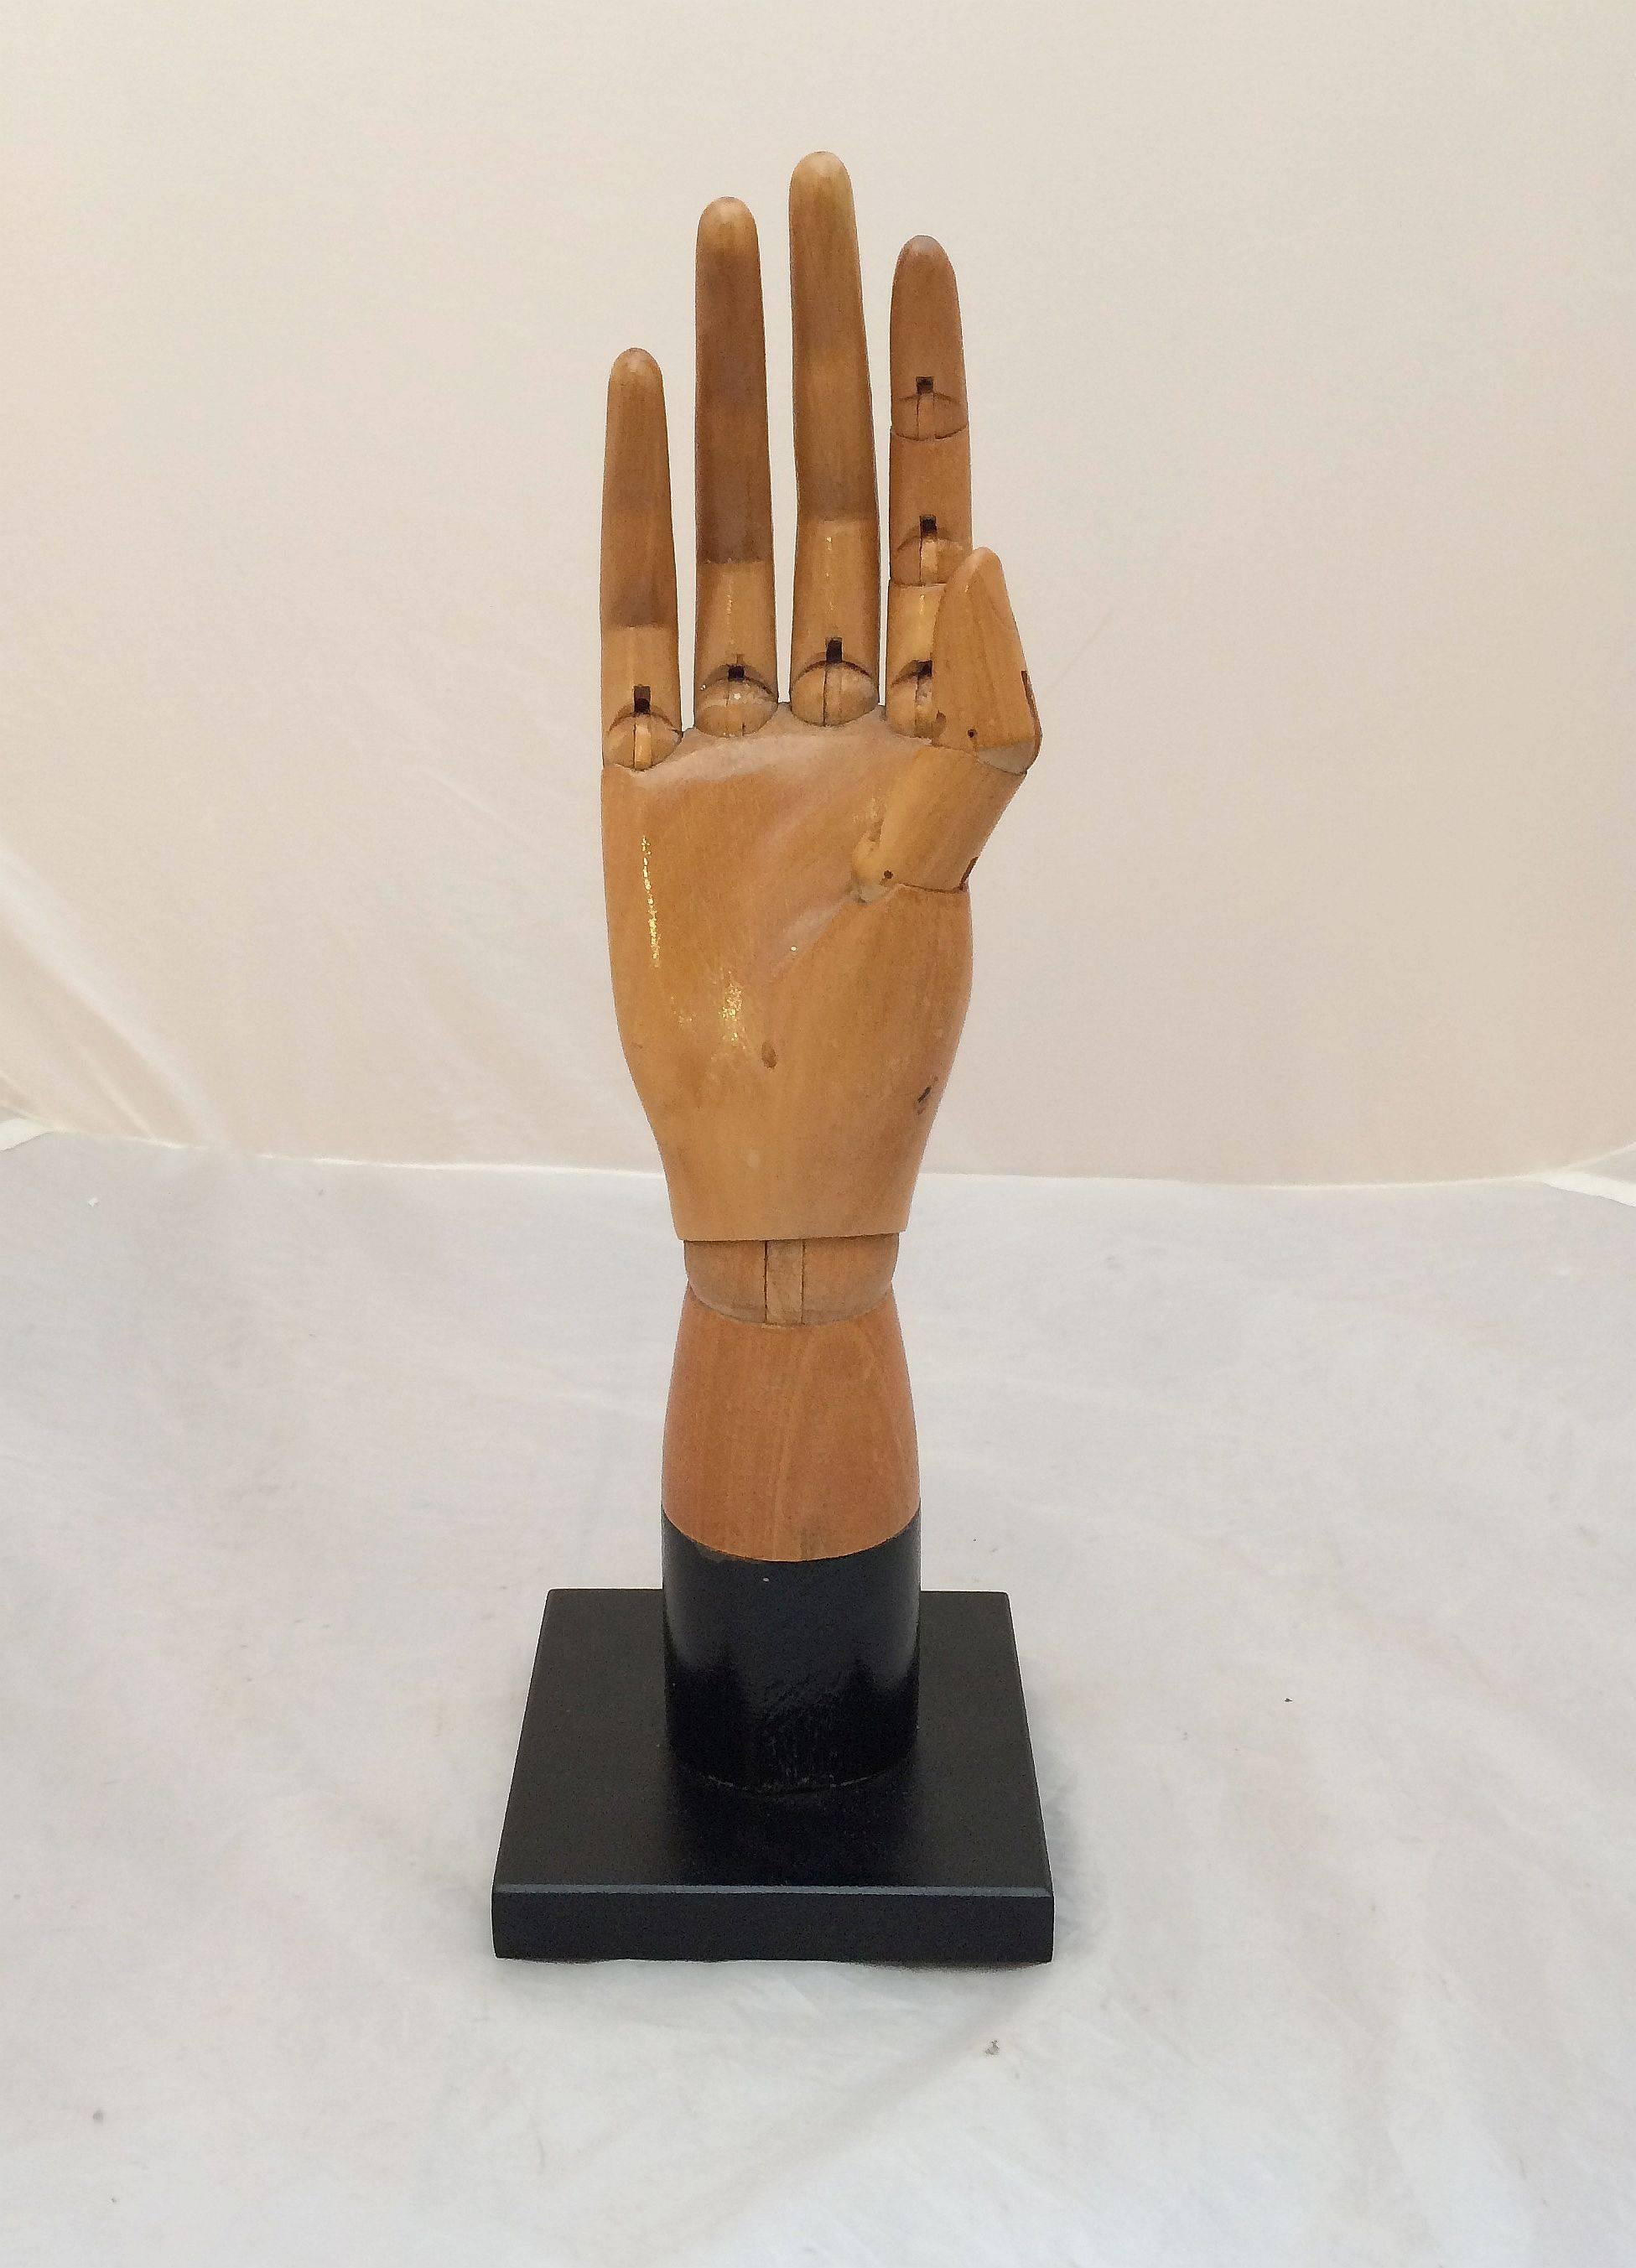 English Articulated Model of Hand from England